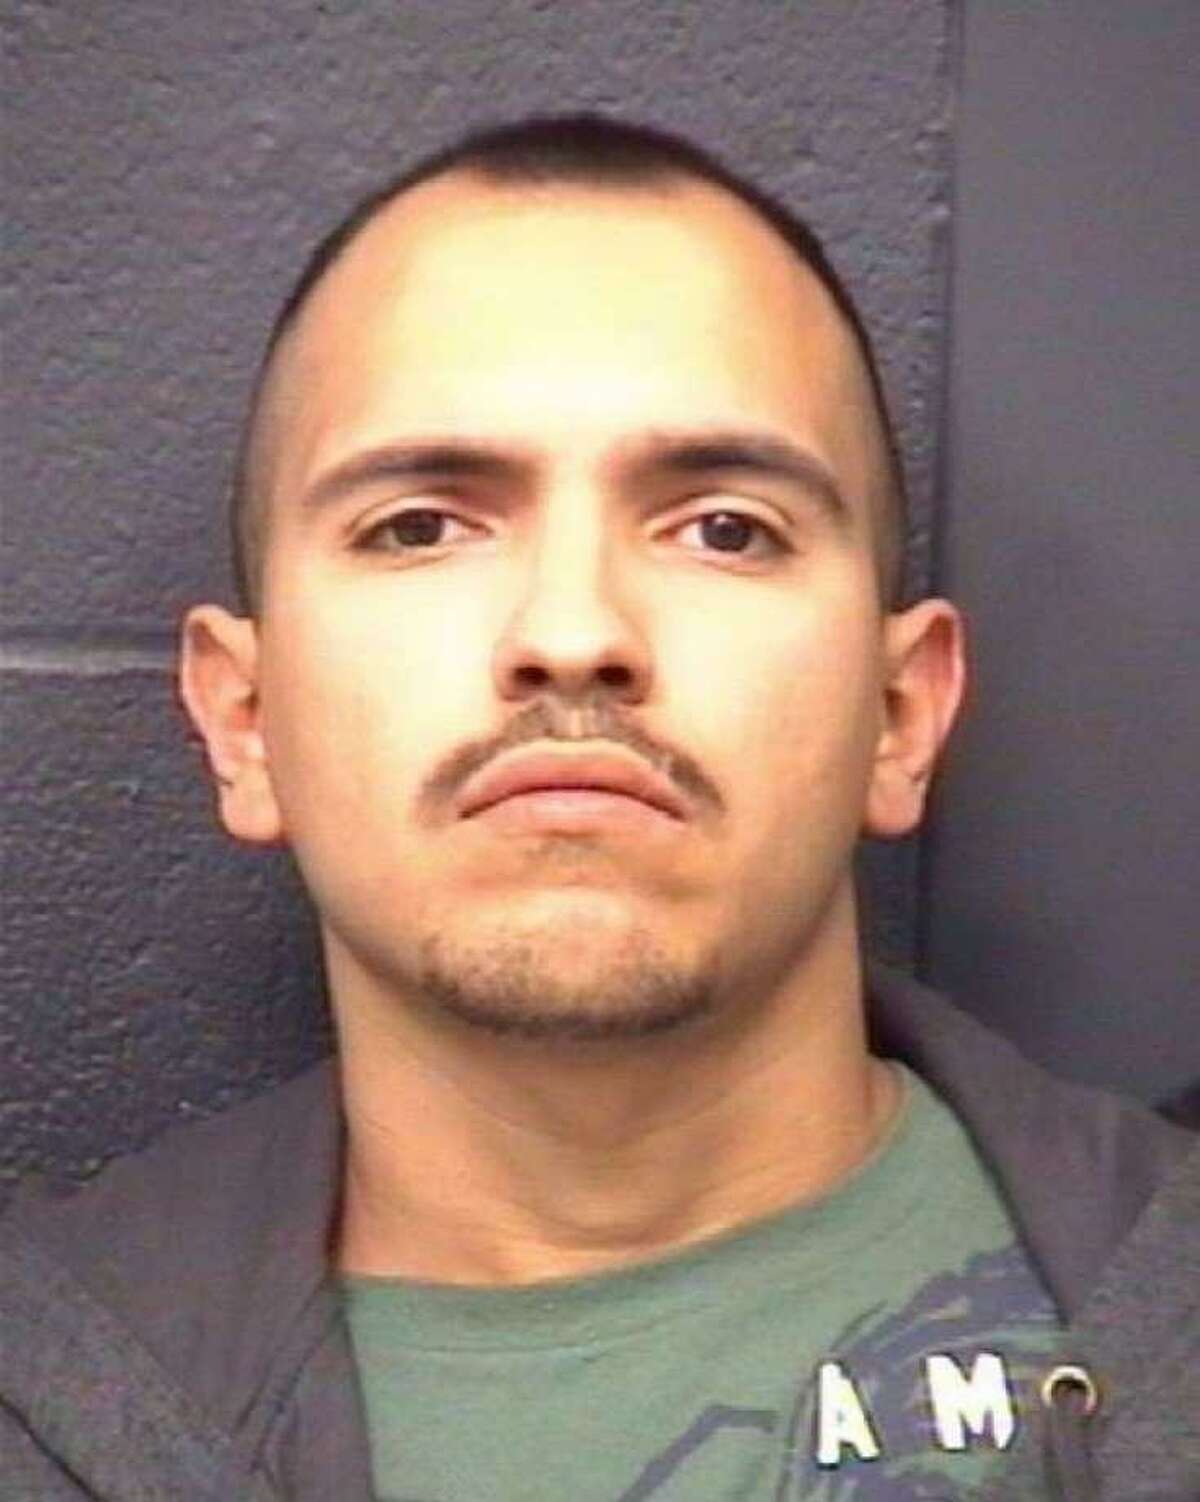 Nelson Anthony Jasso, 30, was indicted on a murder charge in June for the slaying of 38-year-old Juan Antonio Gutierrez. Jury selection for the case is scheduled to begin today.